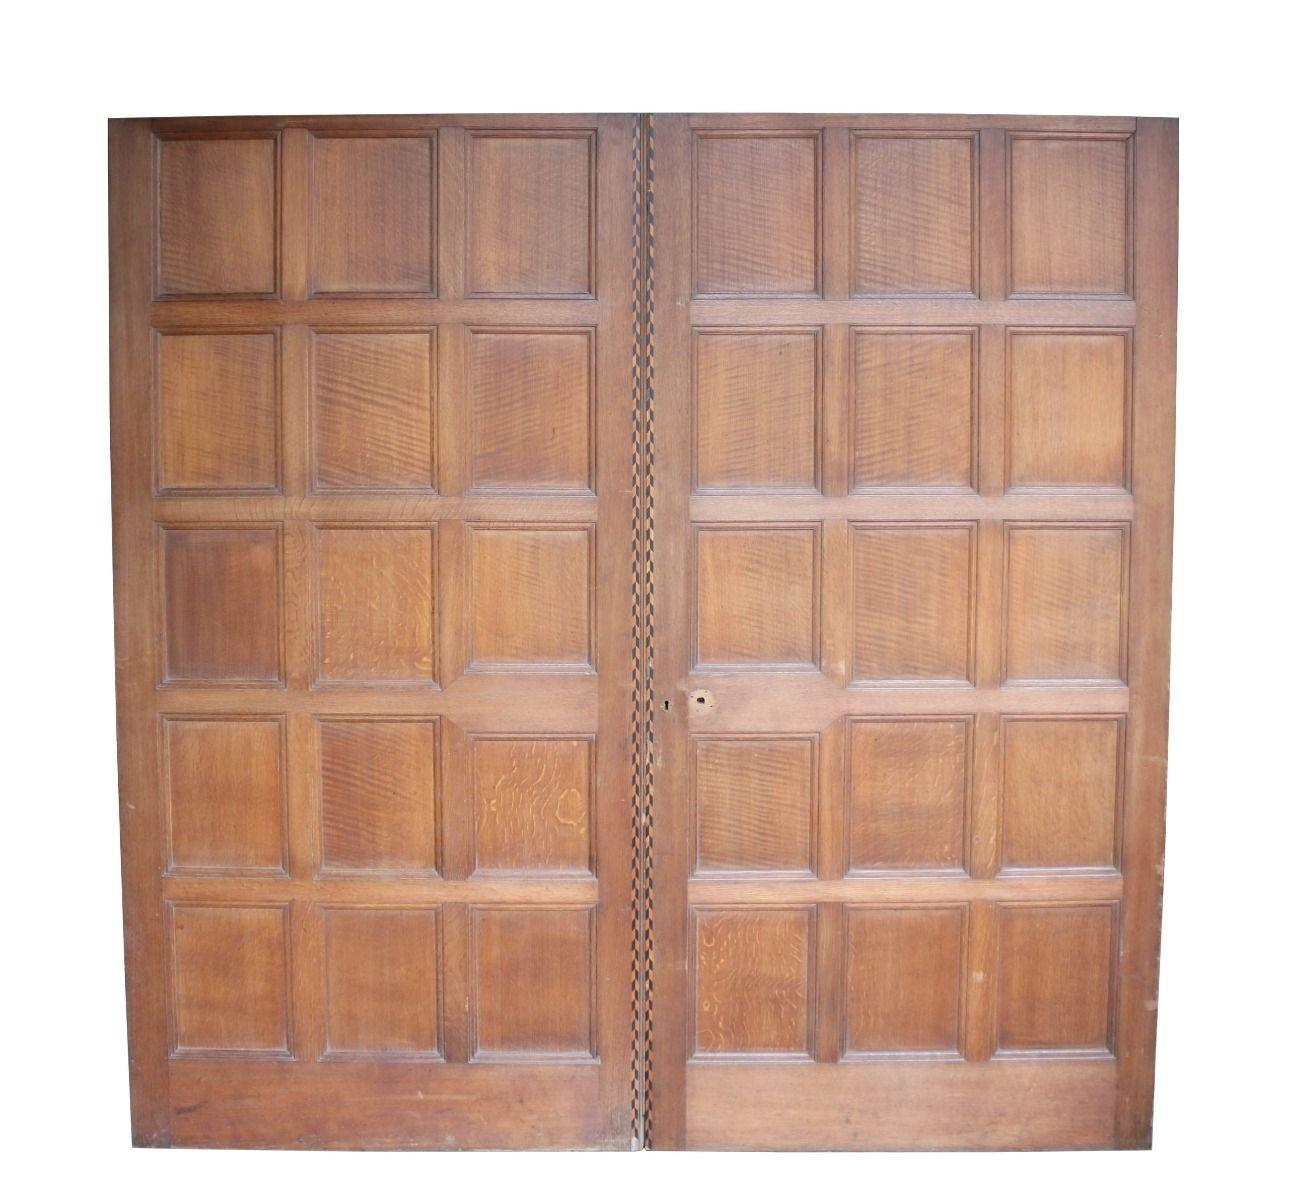 A set of good quality oak double doors, suitable for interior use as room dividing doors.